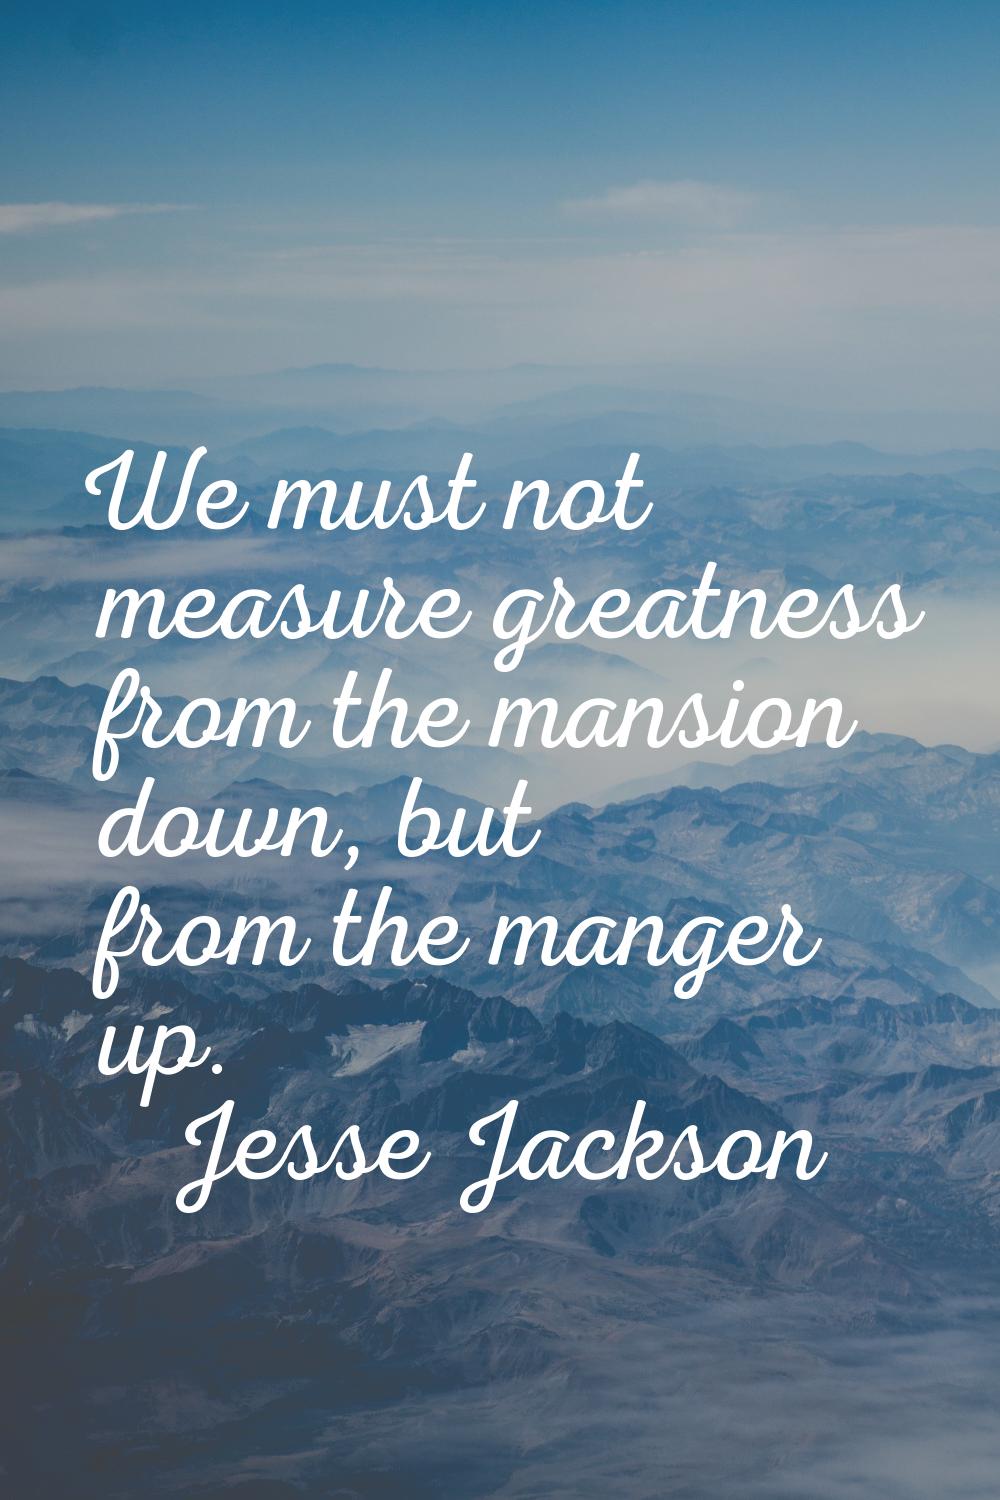 We must not measure greatness from the mansion down, but from the manger up.